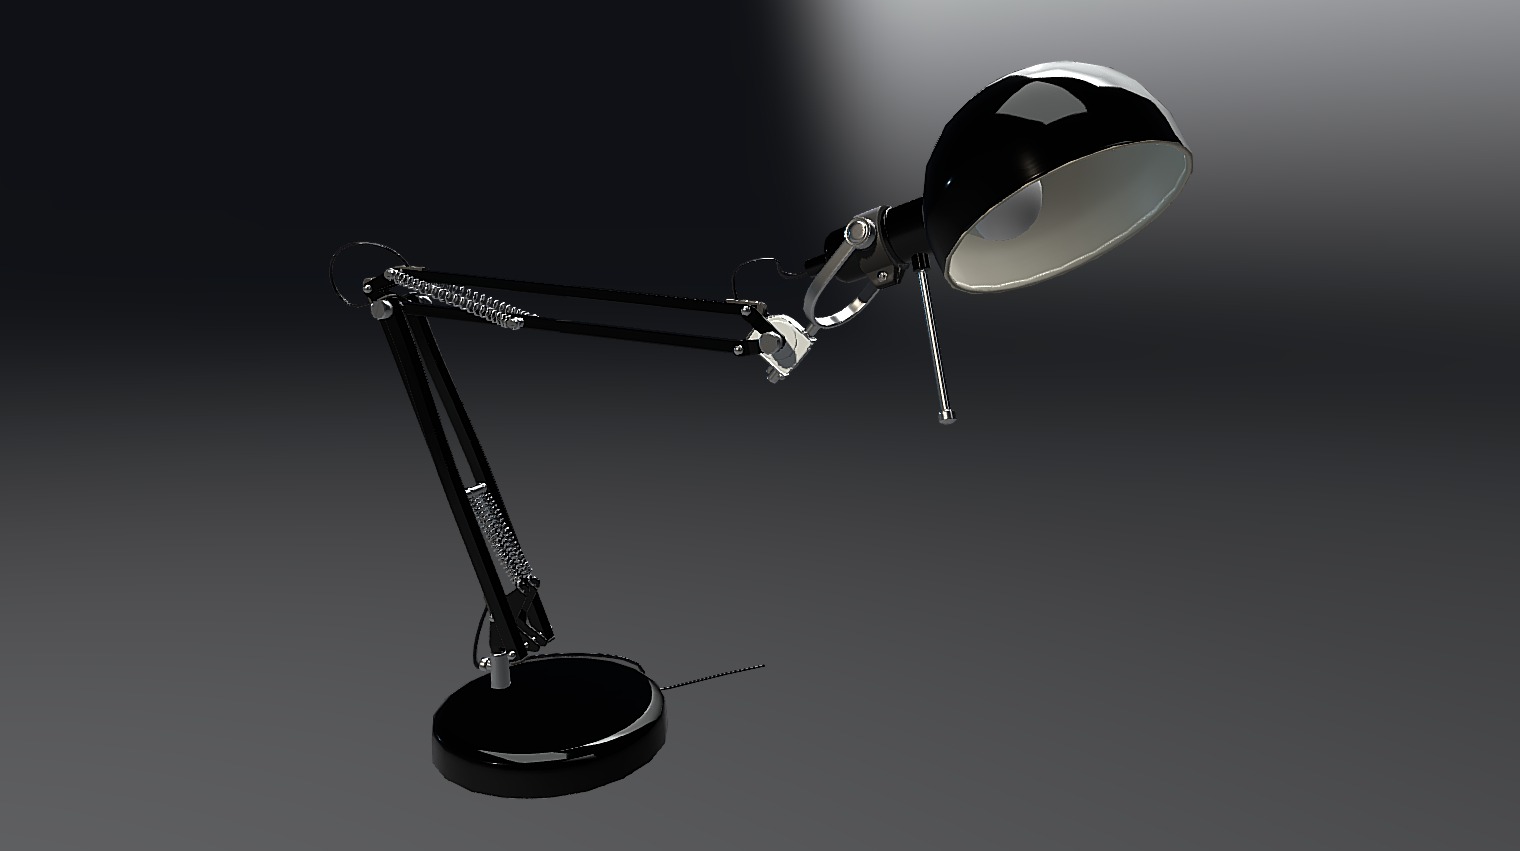 Realistic PBR lamps based on my own Ikea desklamp, to simulate product visualization. Its the same lamp but in three diferent poses. Optimized with reused parts for a better UVmap and baked details from a highpoly. Used as assets for Unreal E4

Programs used: Maya, Substancs painter 2, Photshop and Unreal E4

johanhandin.com

13854tris (almost 50% is the springs 4x1668)
1024x1024 PBR textures - Desk lamp - 3D model by johanhandin 3d model